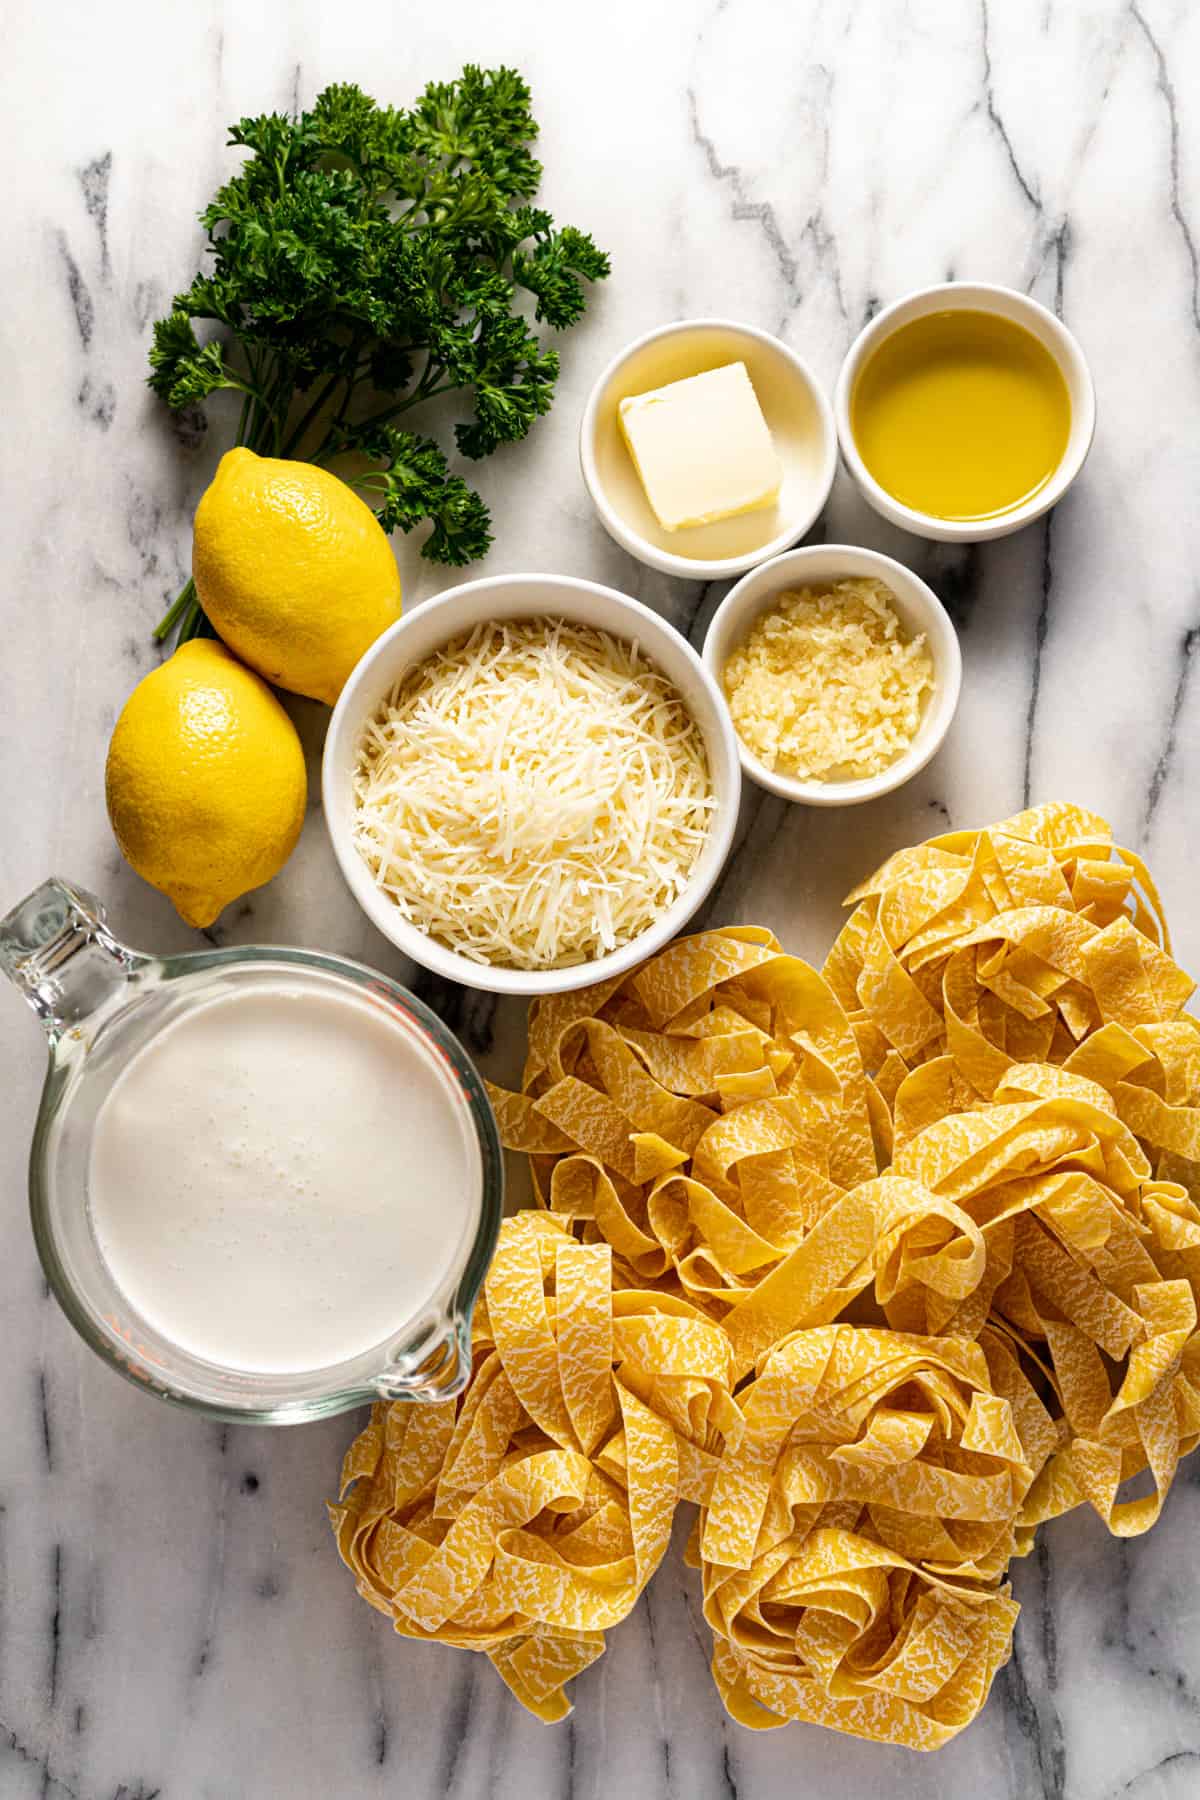 White marble counter top with bowls of ingredients to make lemon pasta.